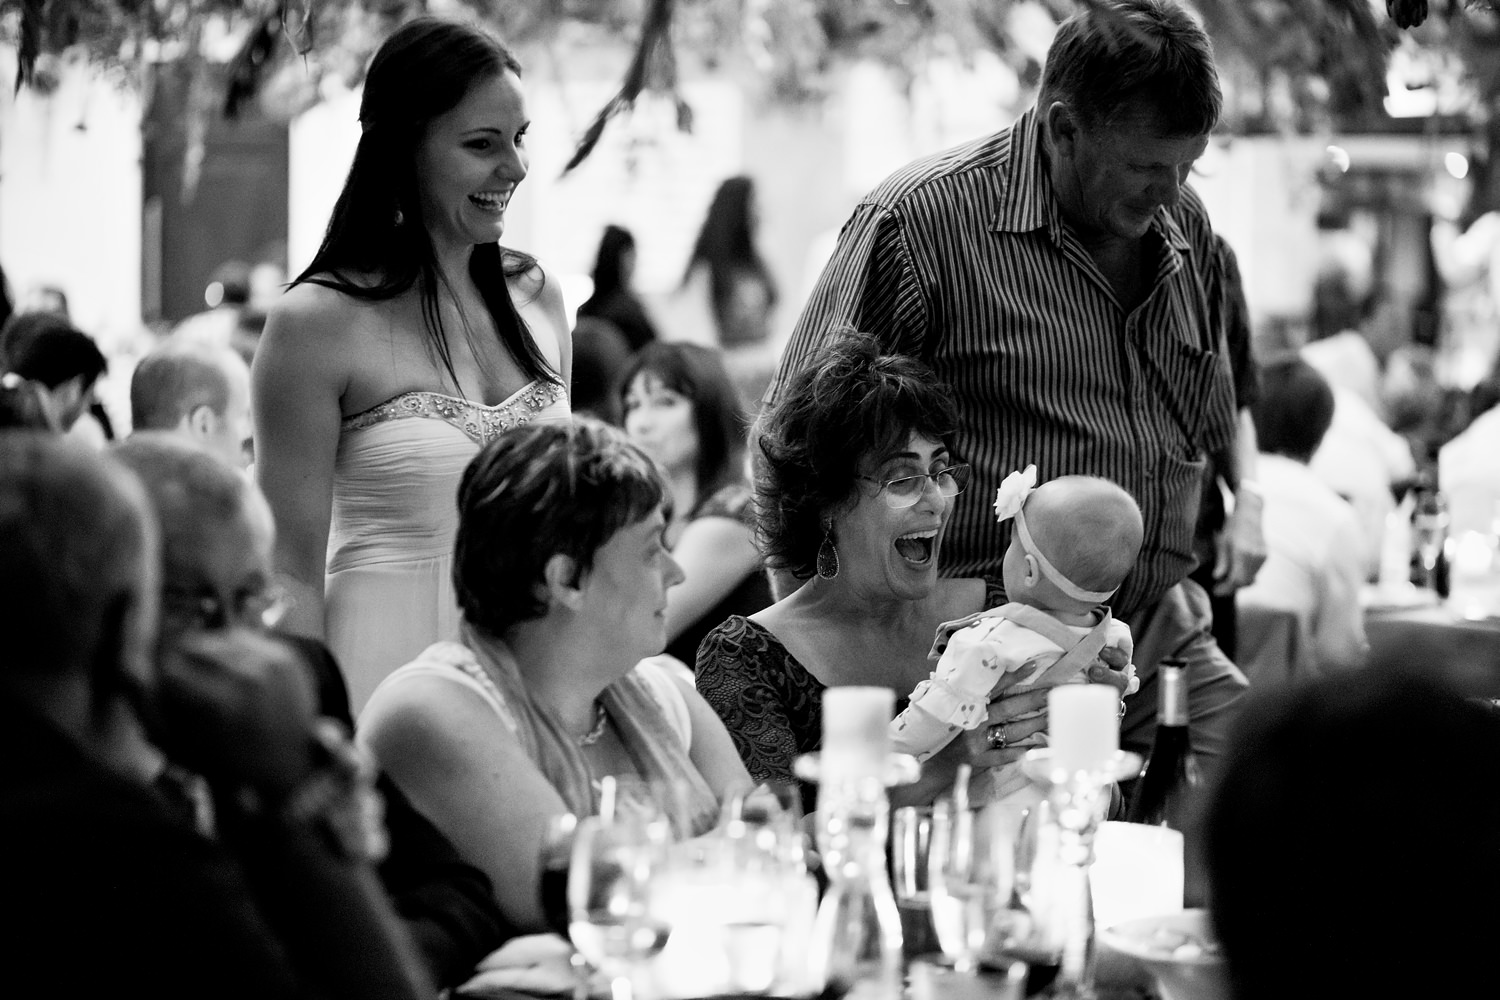 A woman plays peekaboo with a baby during a wedding reception